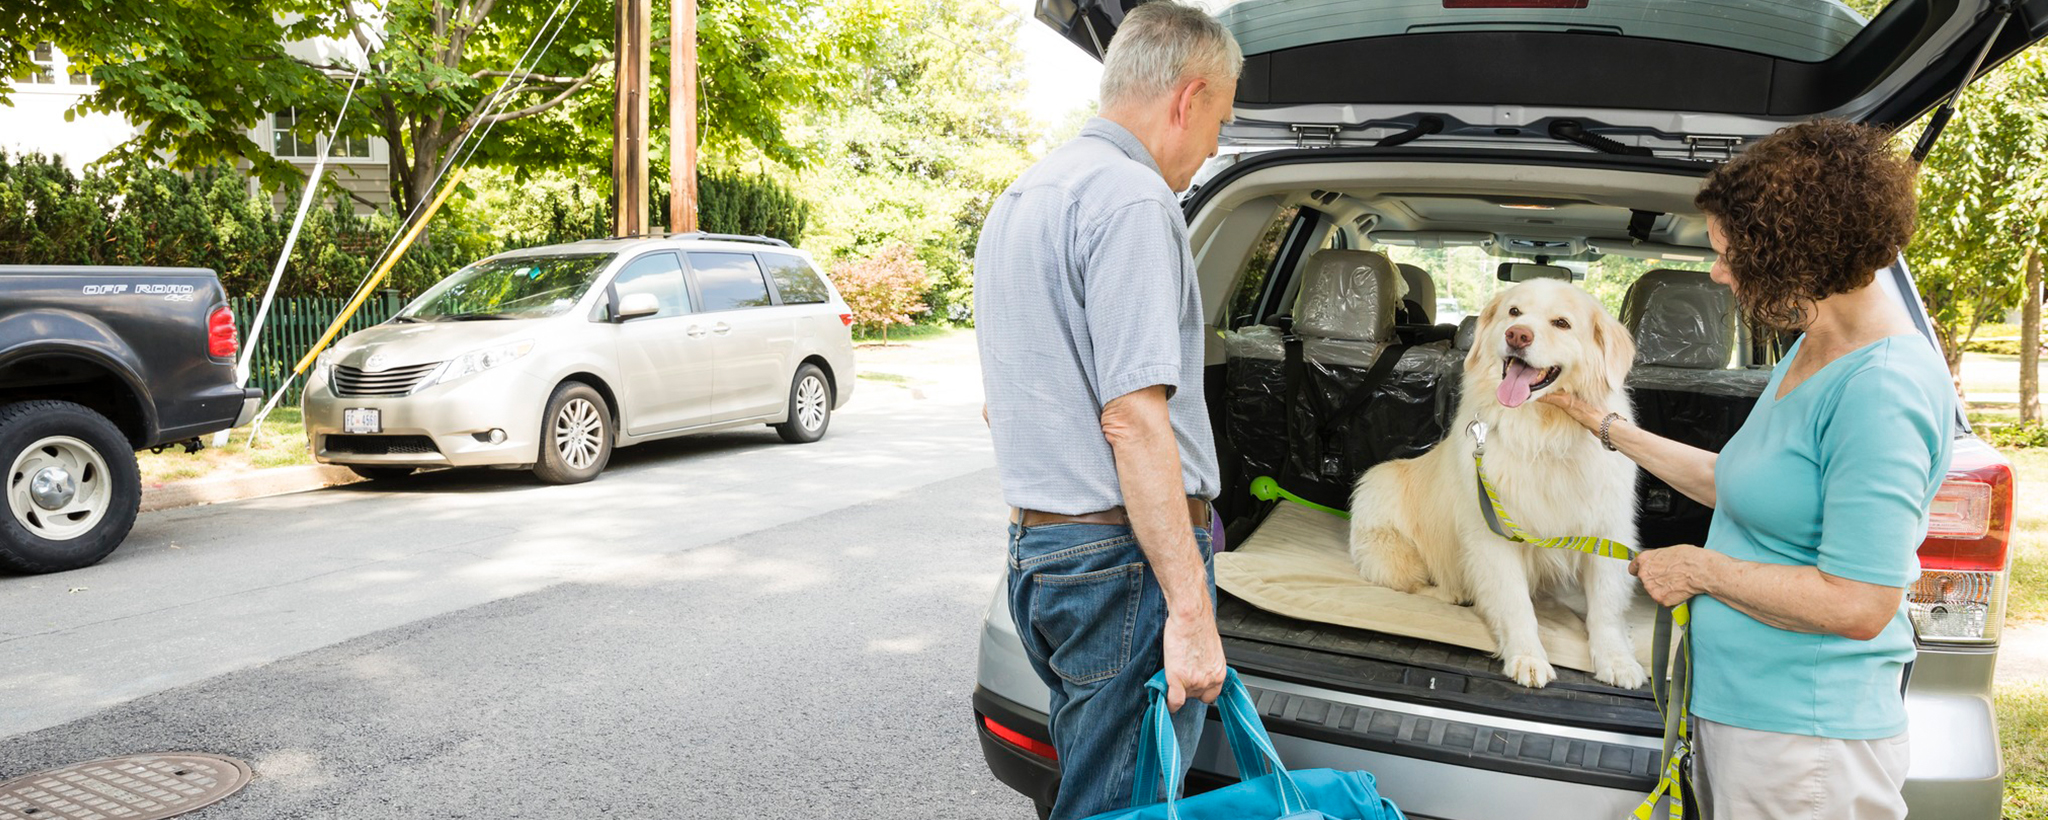 Couple putting their dog in the back of an SUV with go bags